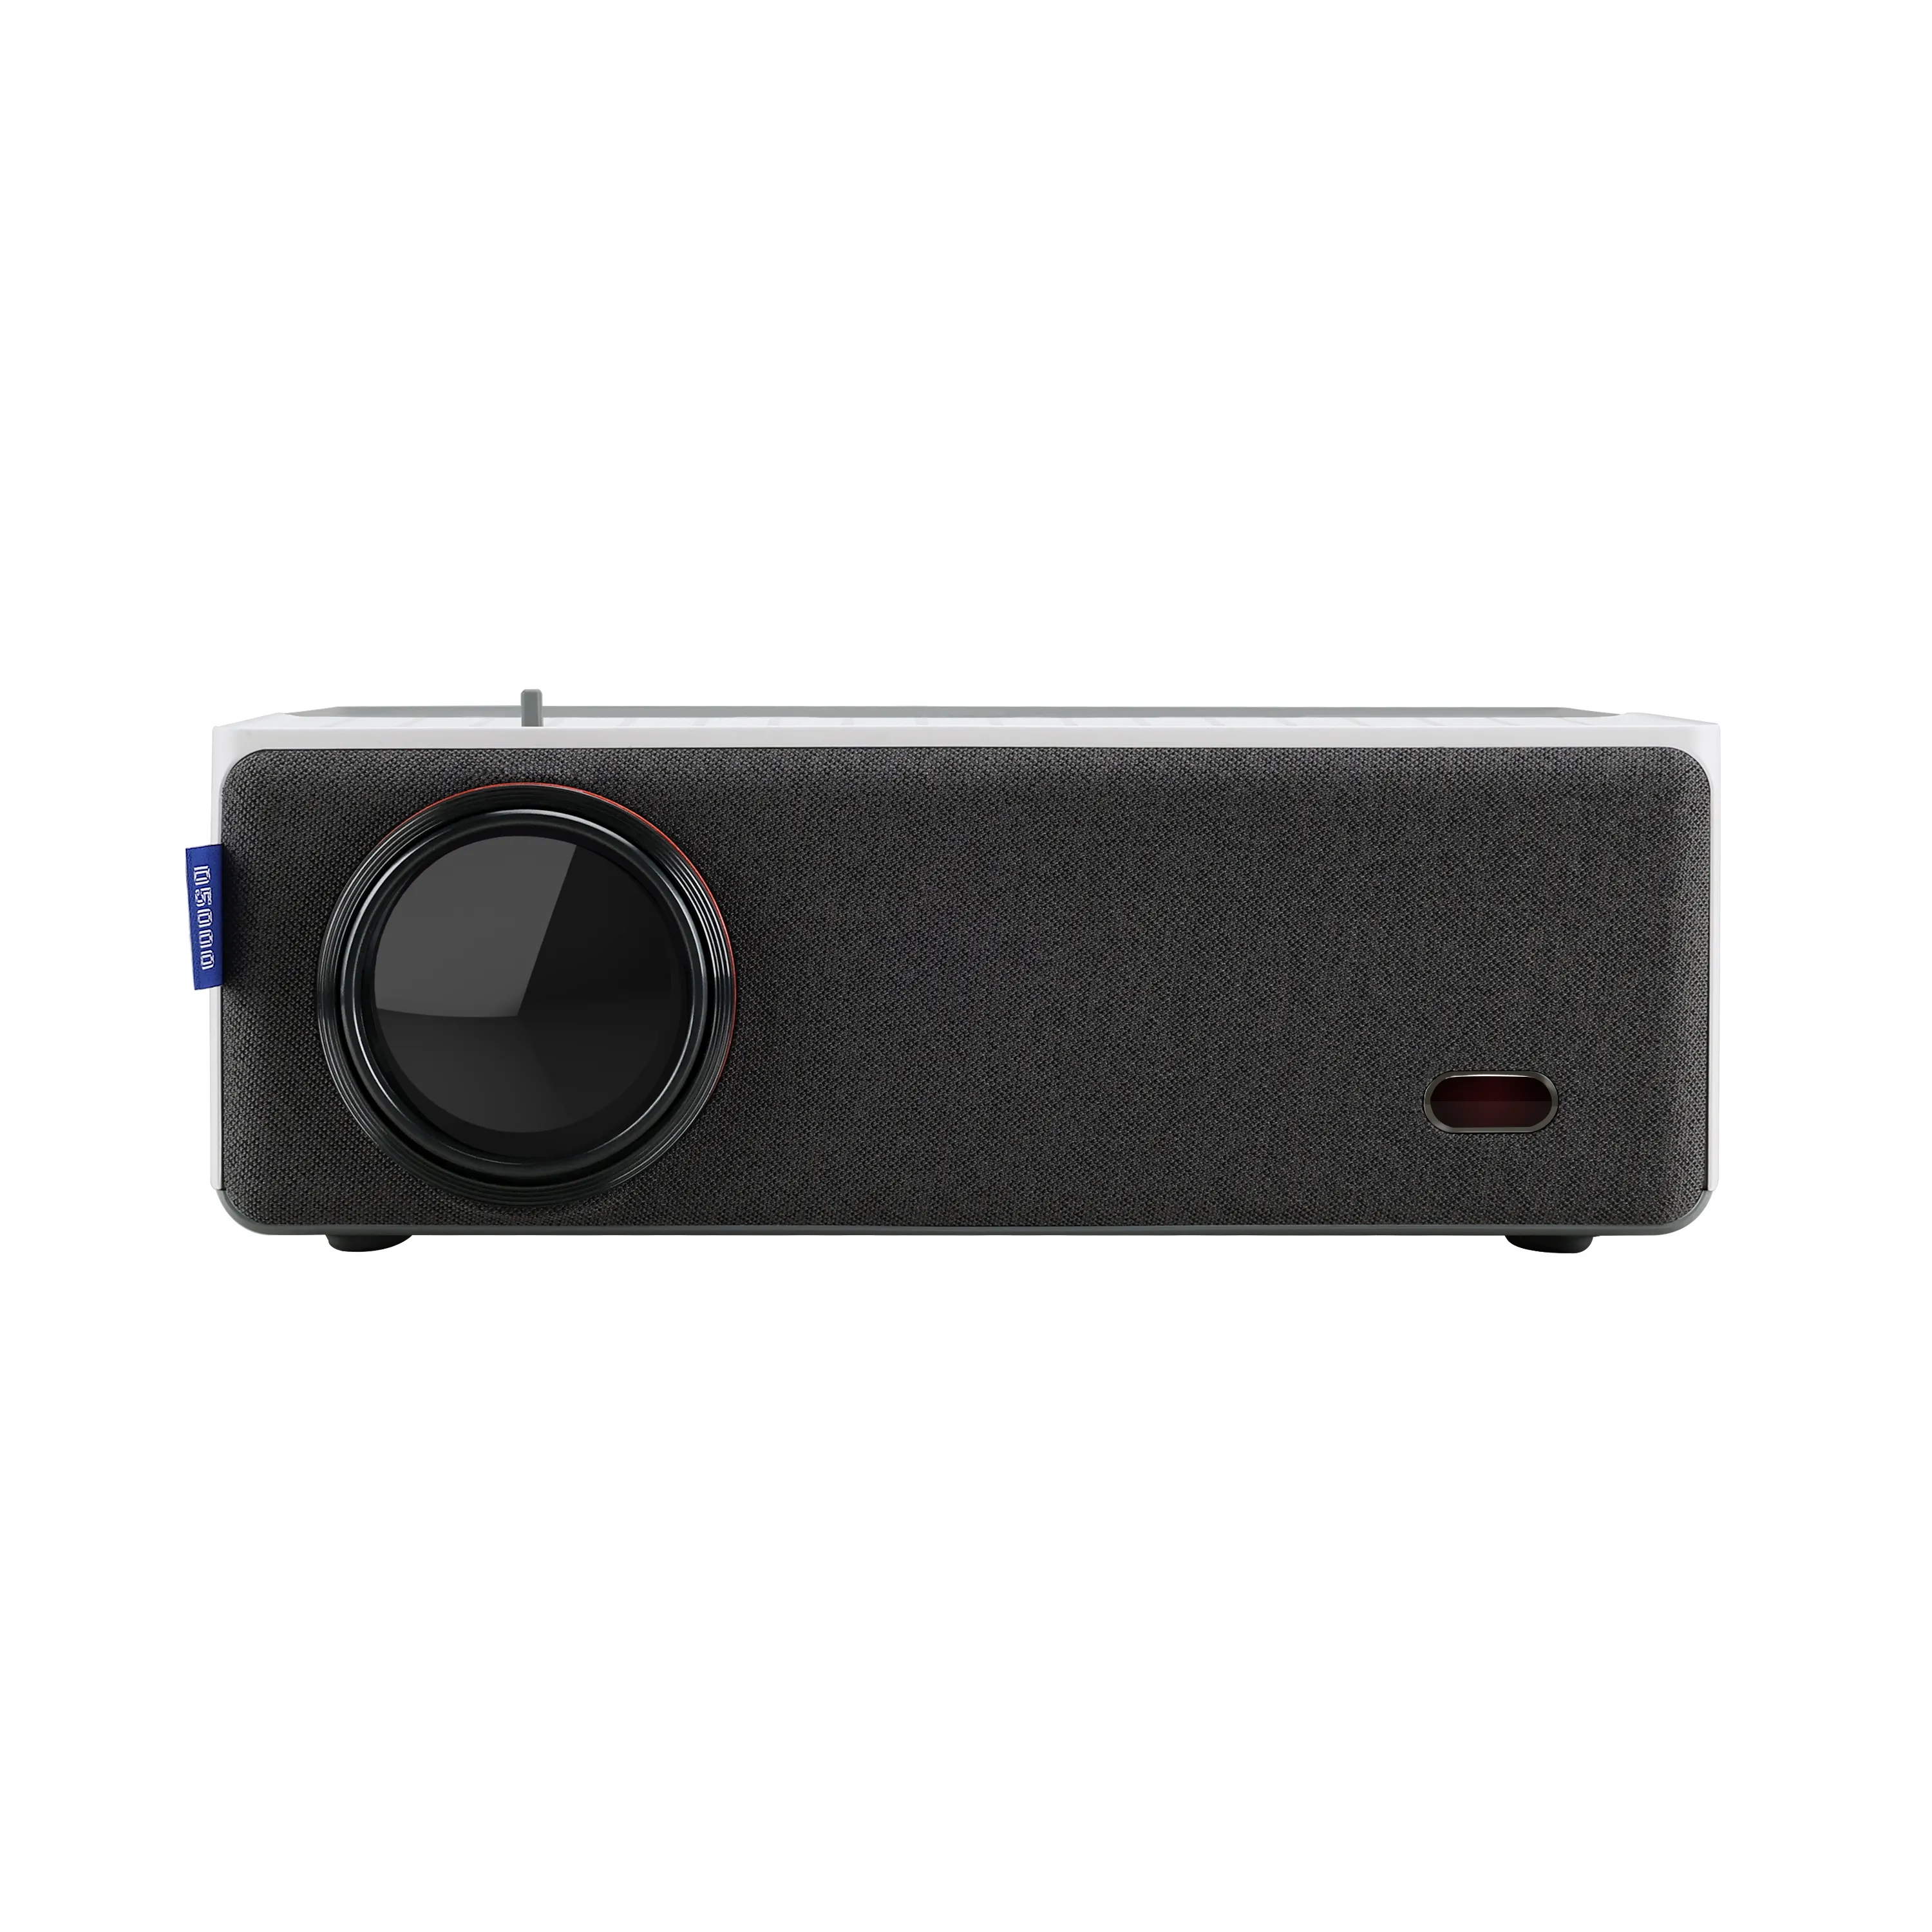 vivibright WIFI Bluetooth Projector D5000 8800 Lux Brightness Native 1080P Movie Projector Remote Compatible with Phone Computer